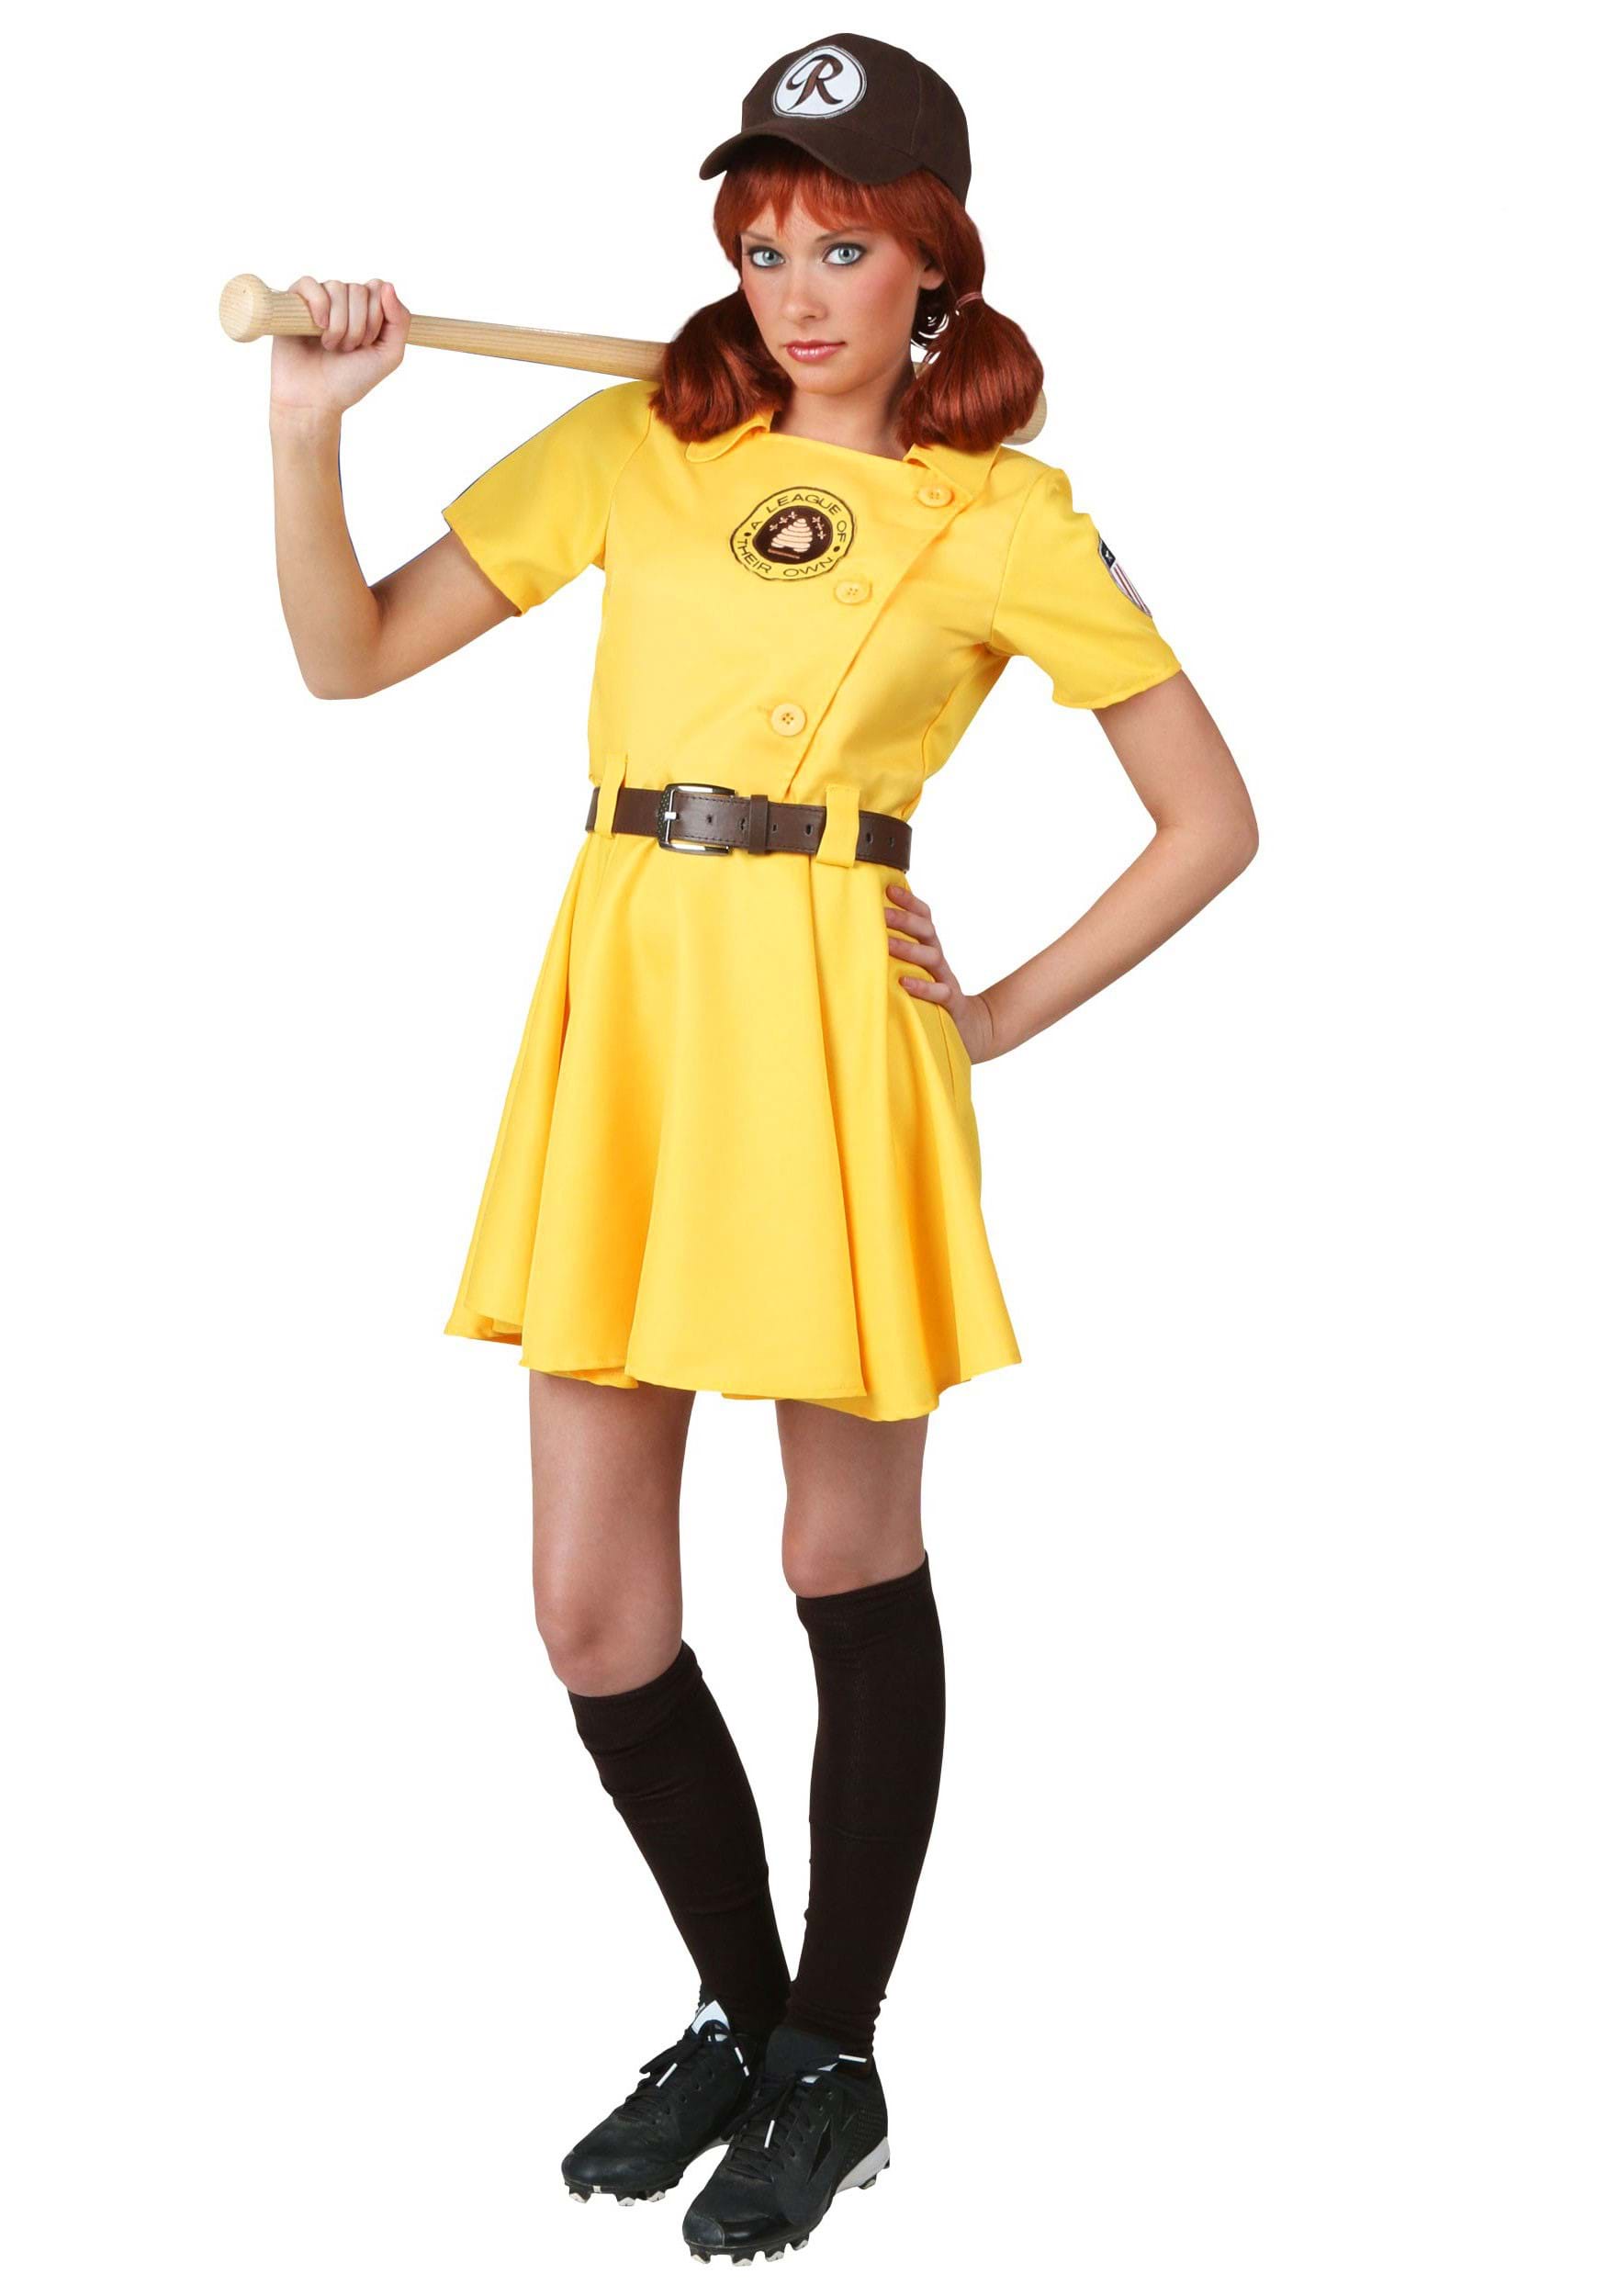 A League of Their Own Kit Costume for Women